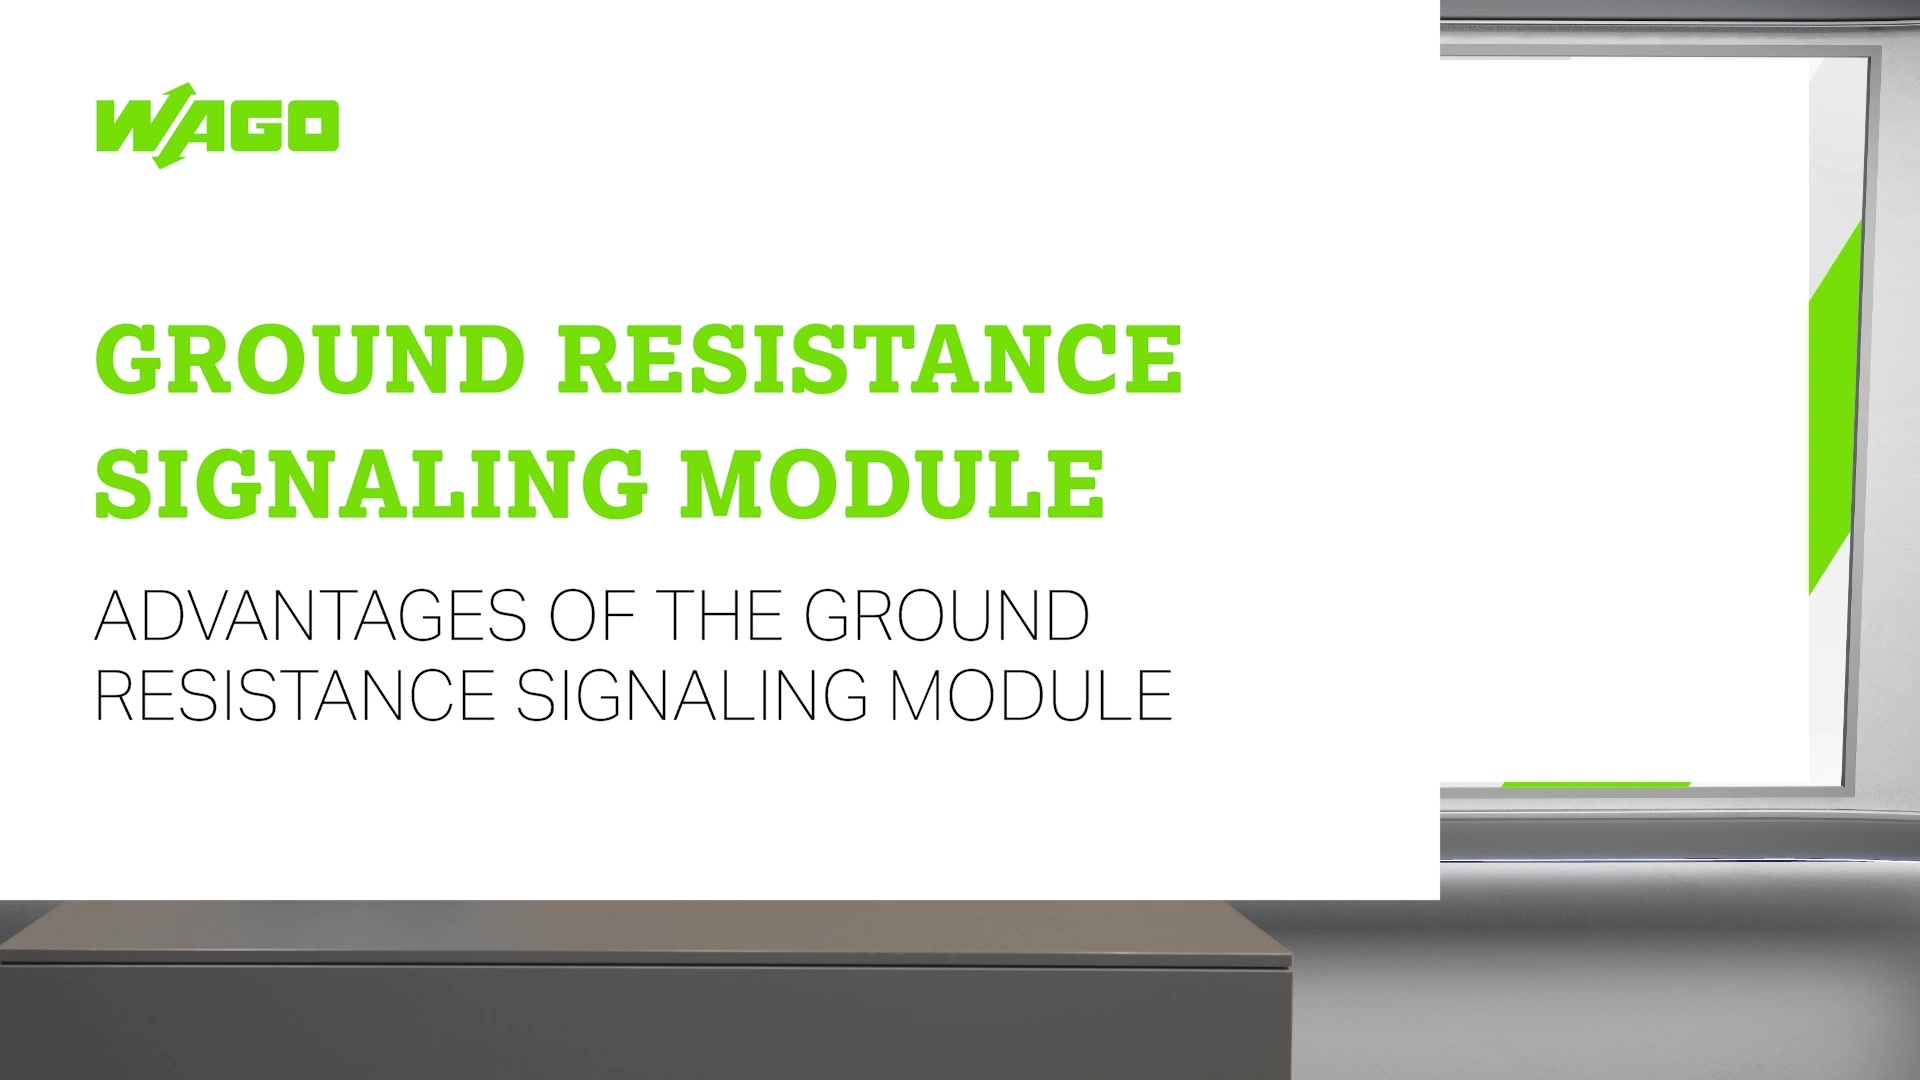 Advantages of the ground resistance signaling module